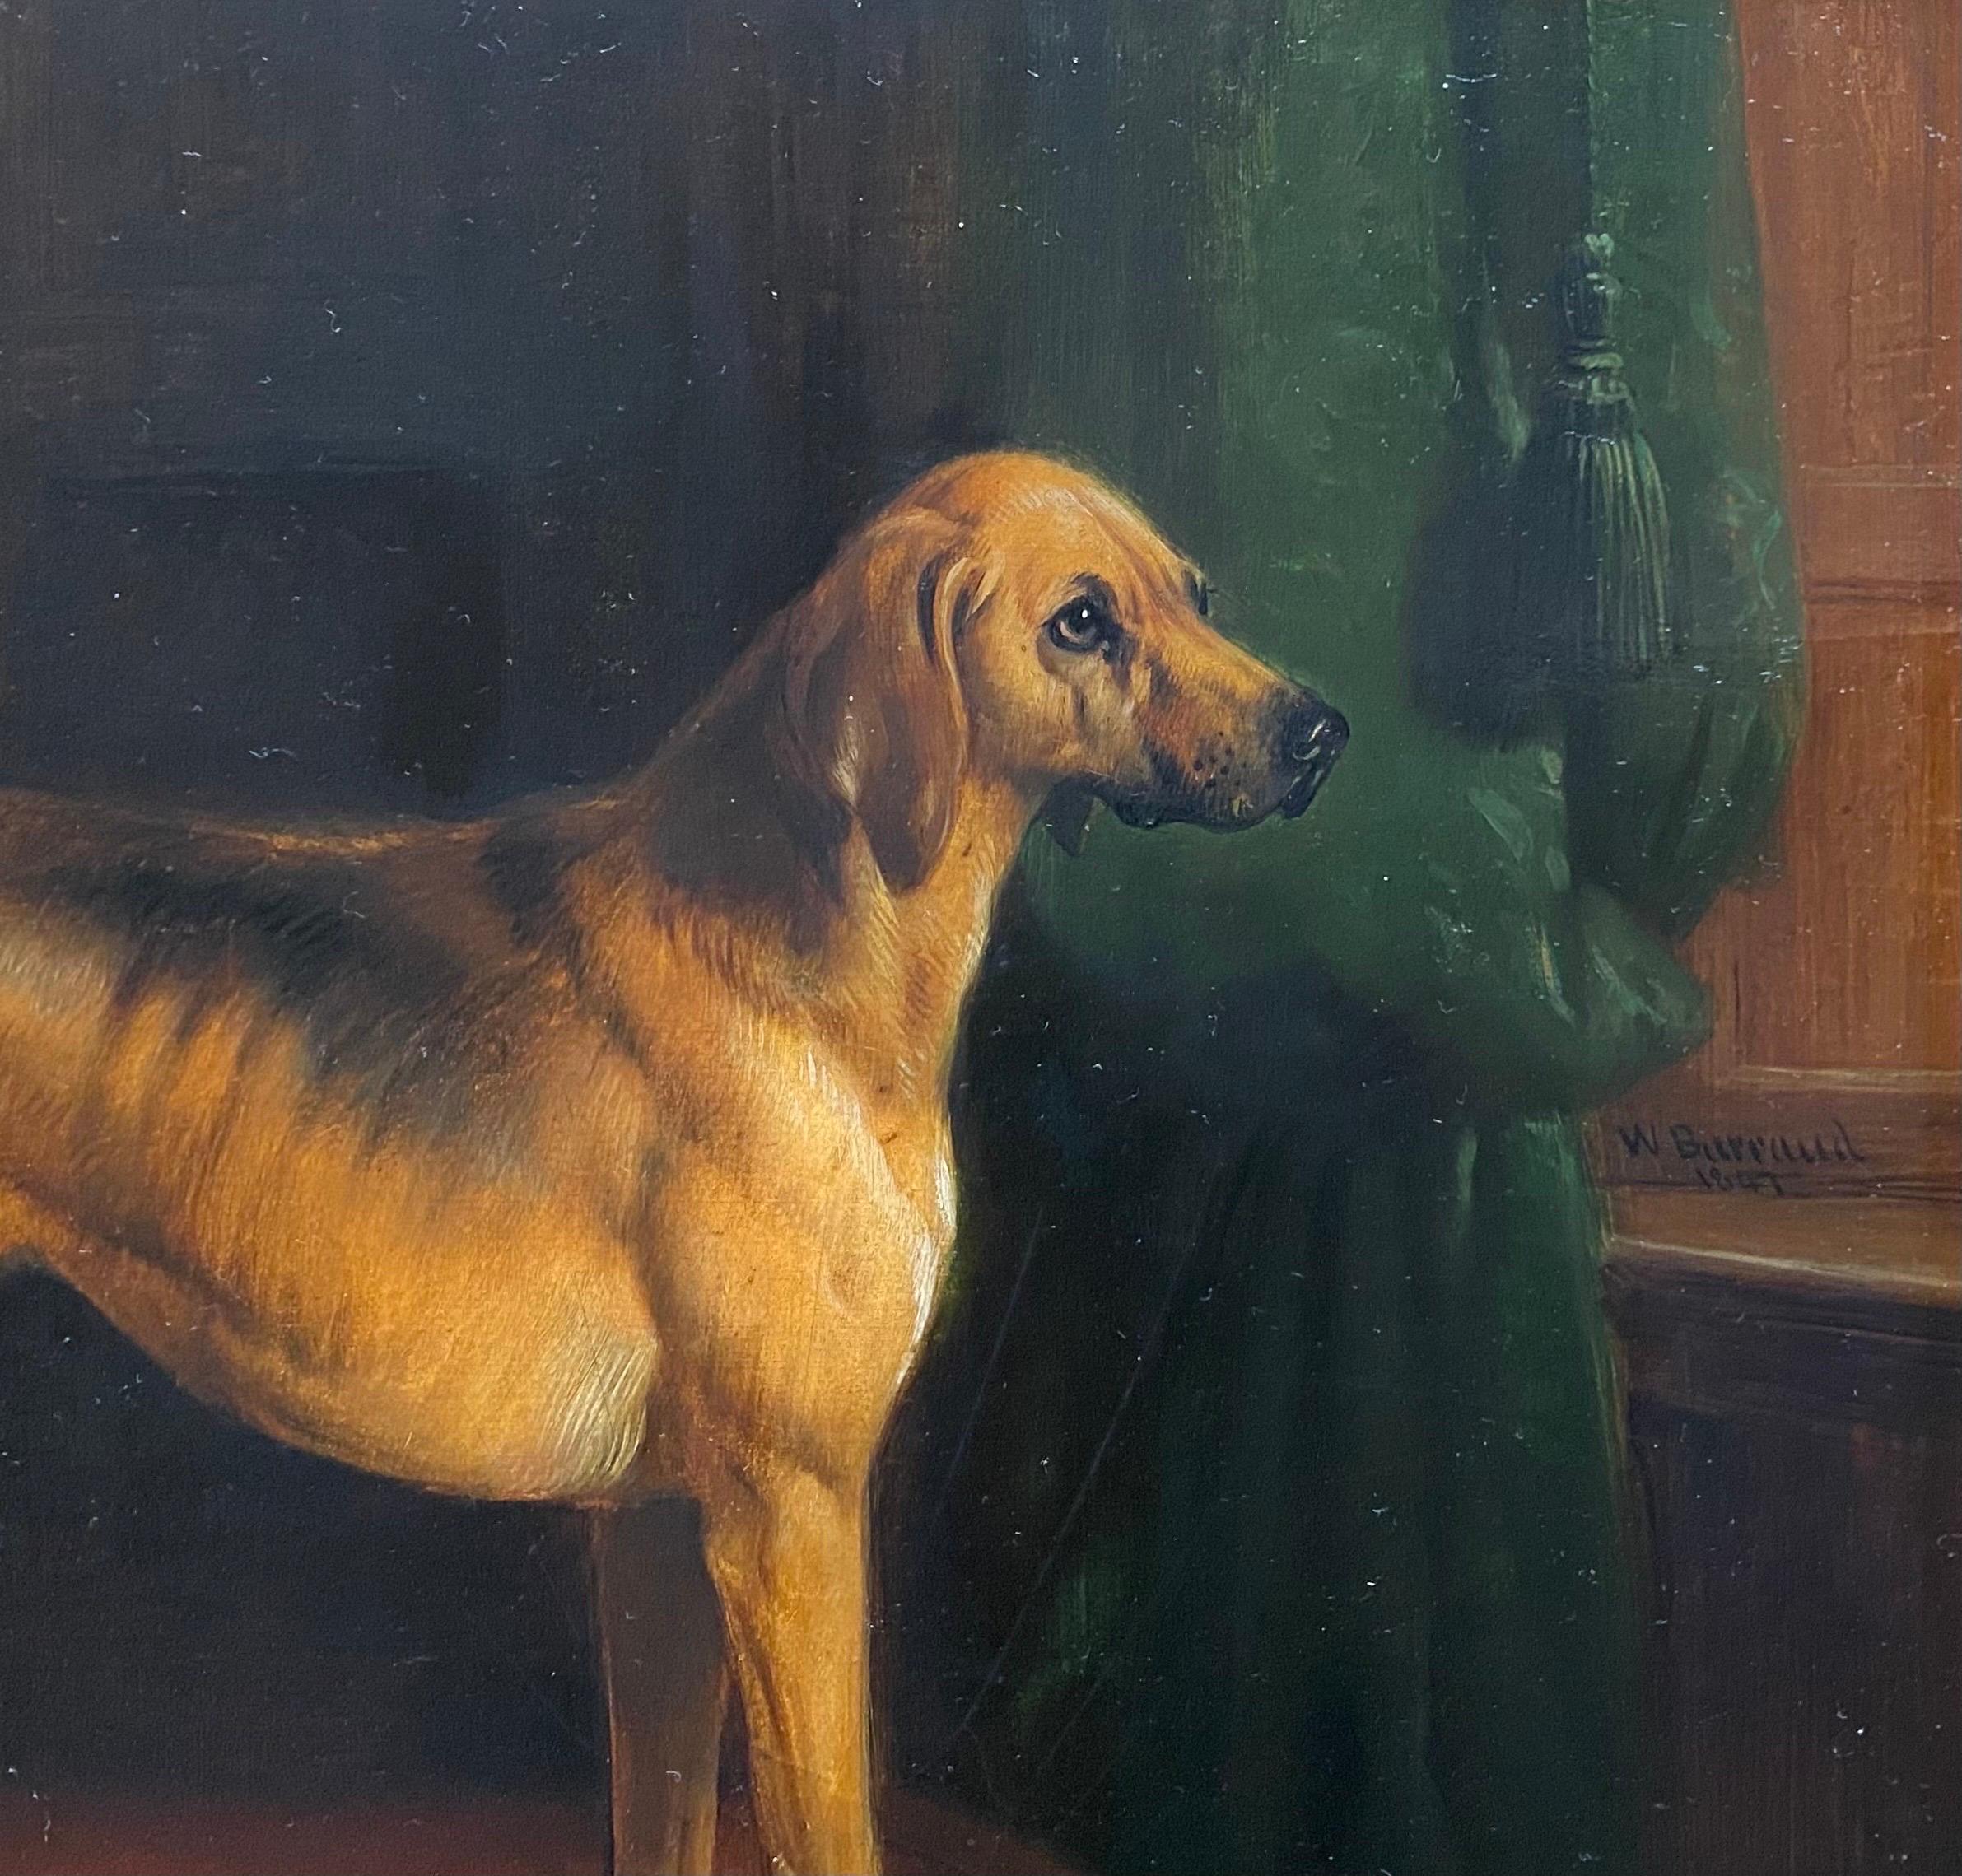 19th century portrait of a Great Dane dog in an interior, signed and dated 1847 - Painting by William Barraud